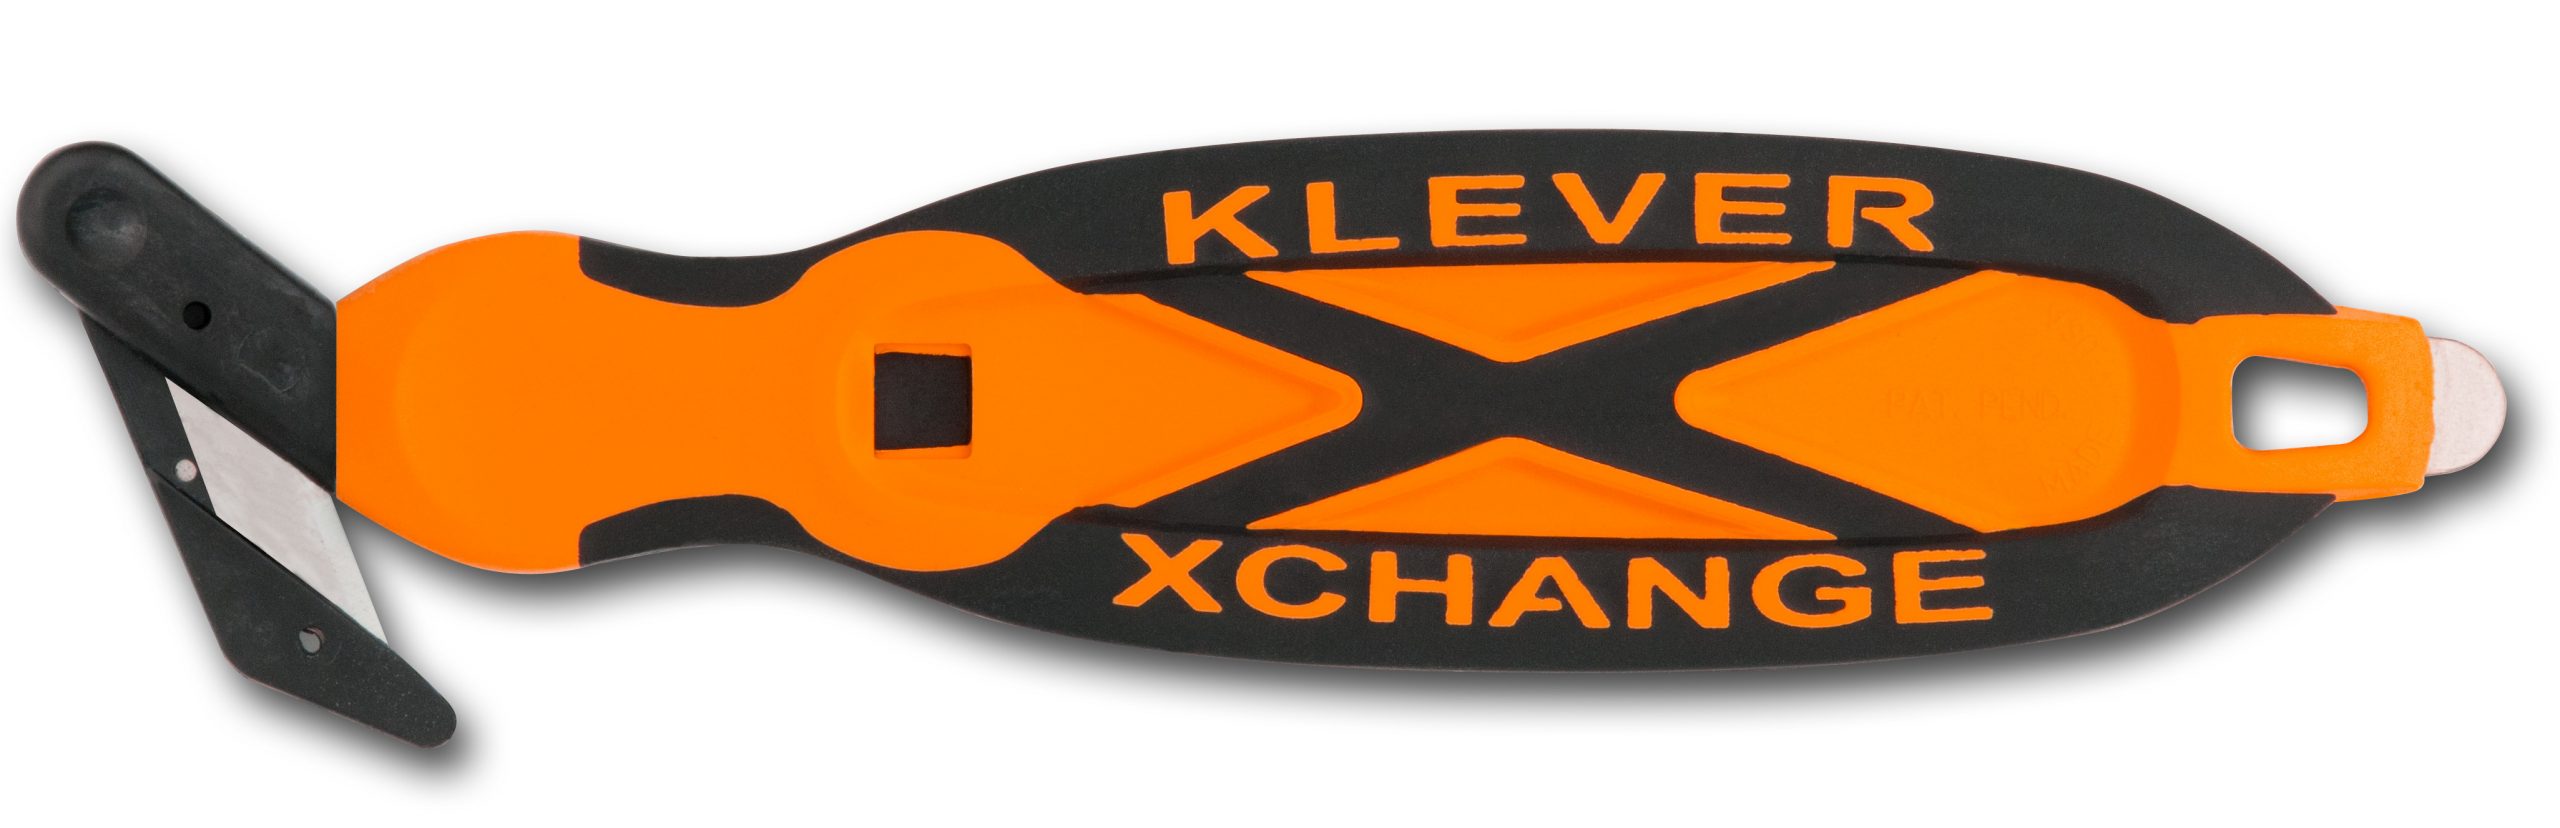 Details about   Klever Xchange Safety Cutter 12 Pack KCJ-XC-35 wide head for thick cardboard 